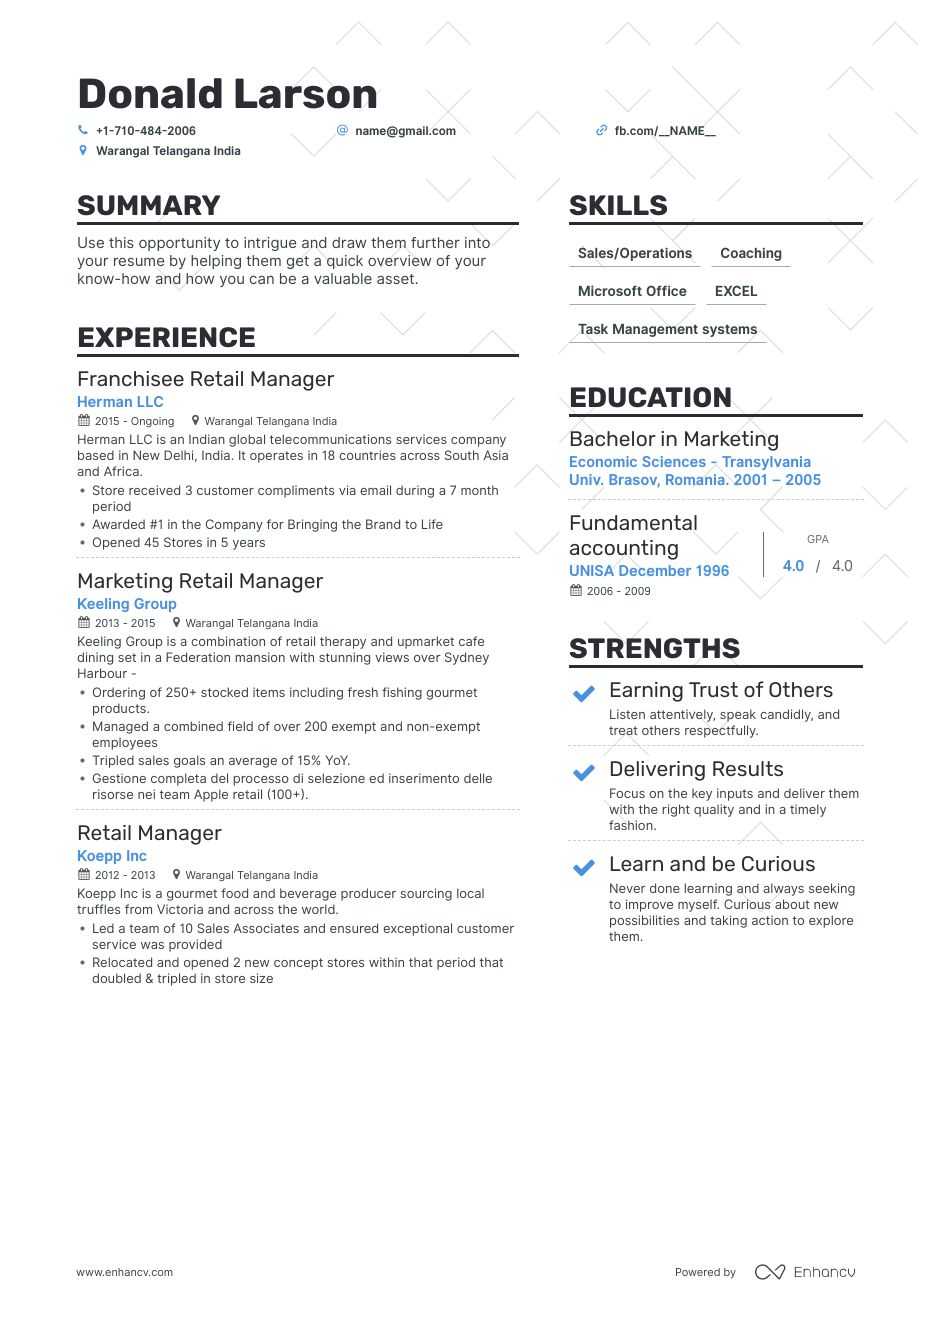 retail manager resume example